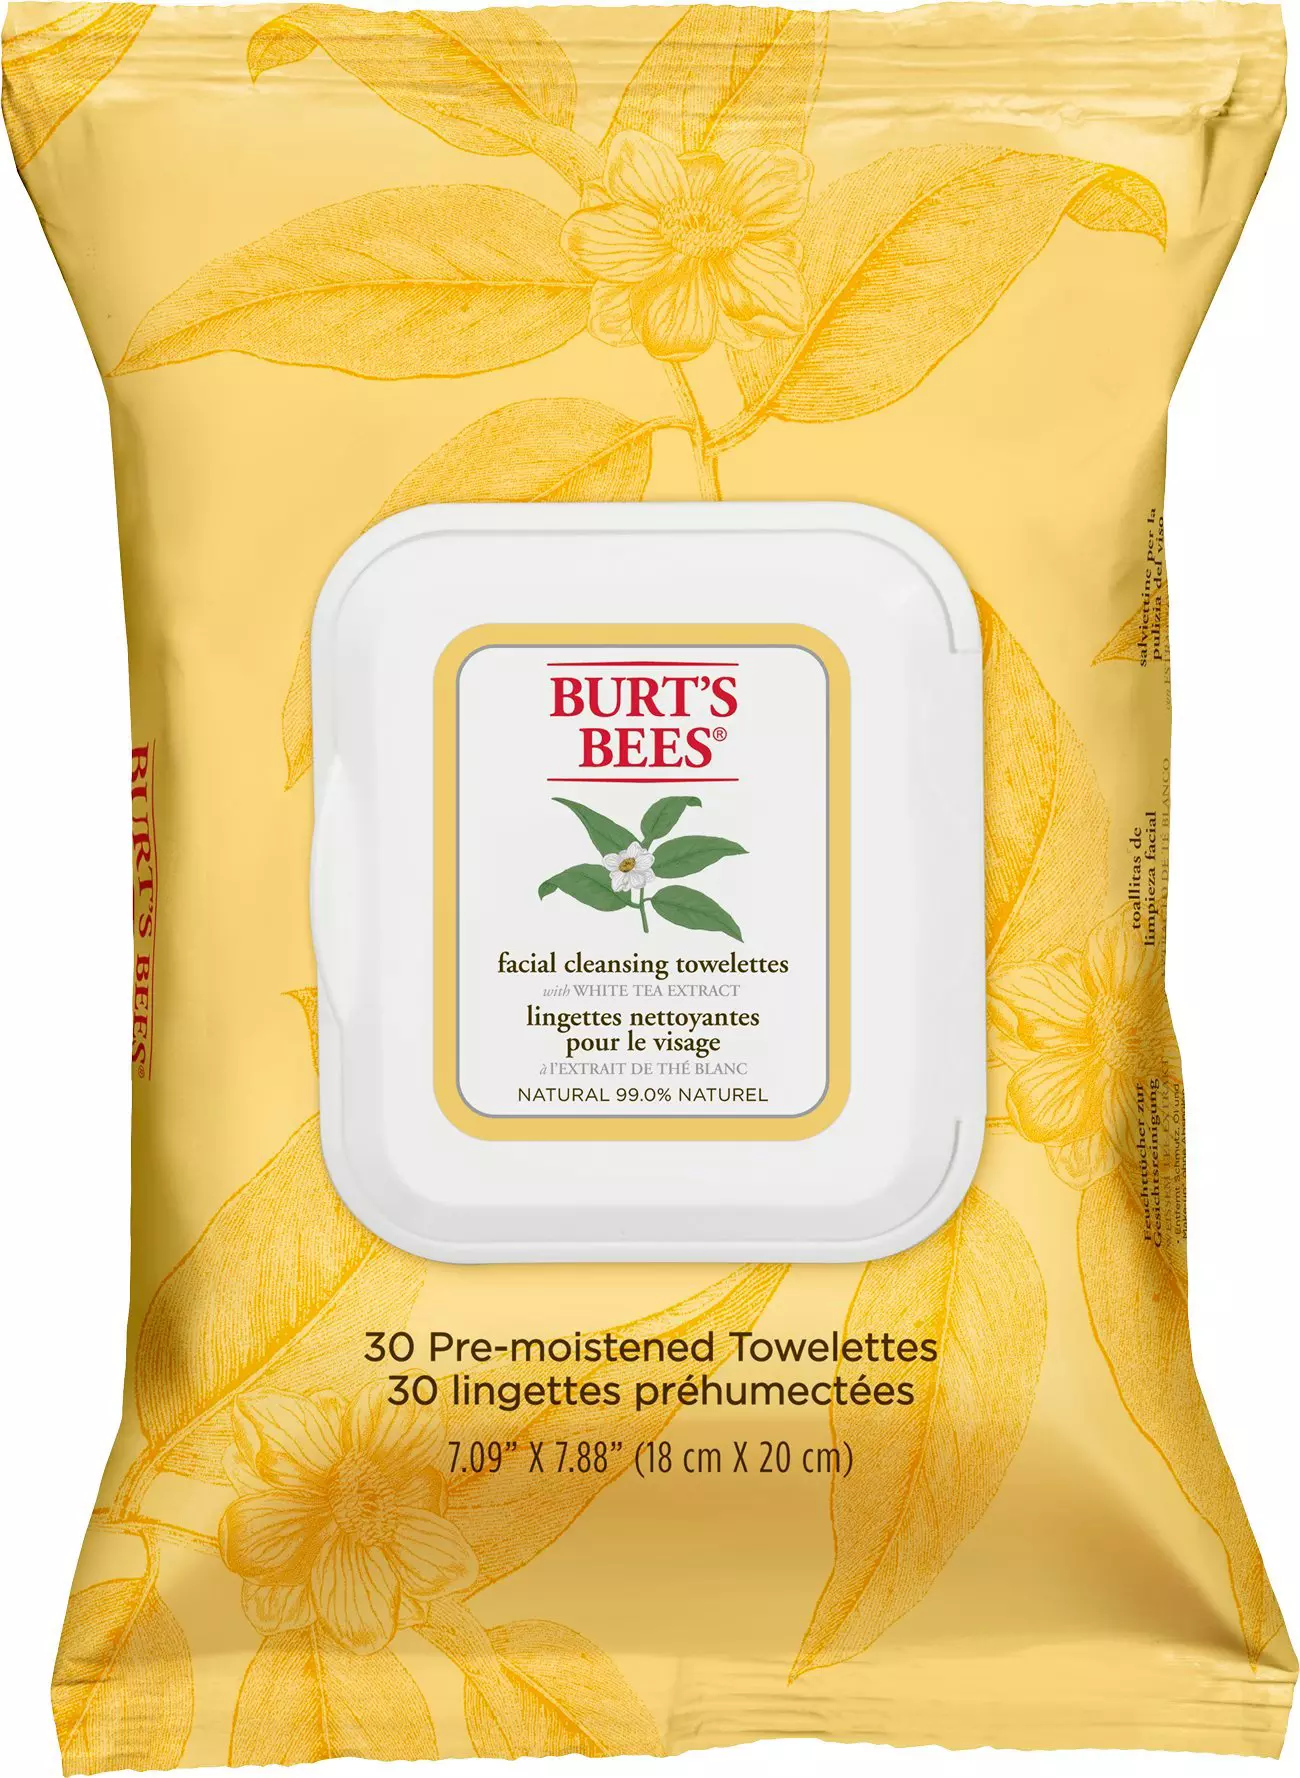 Burts Bees Facial Cleansing Towelettes White